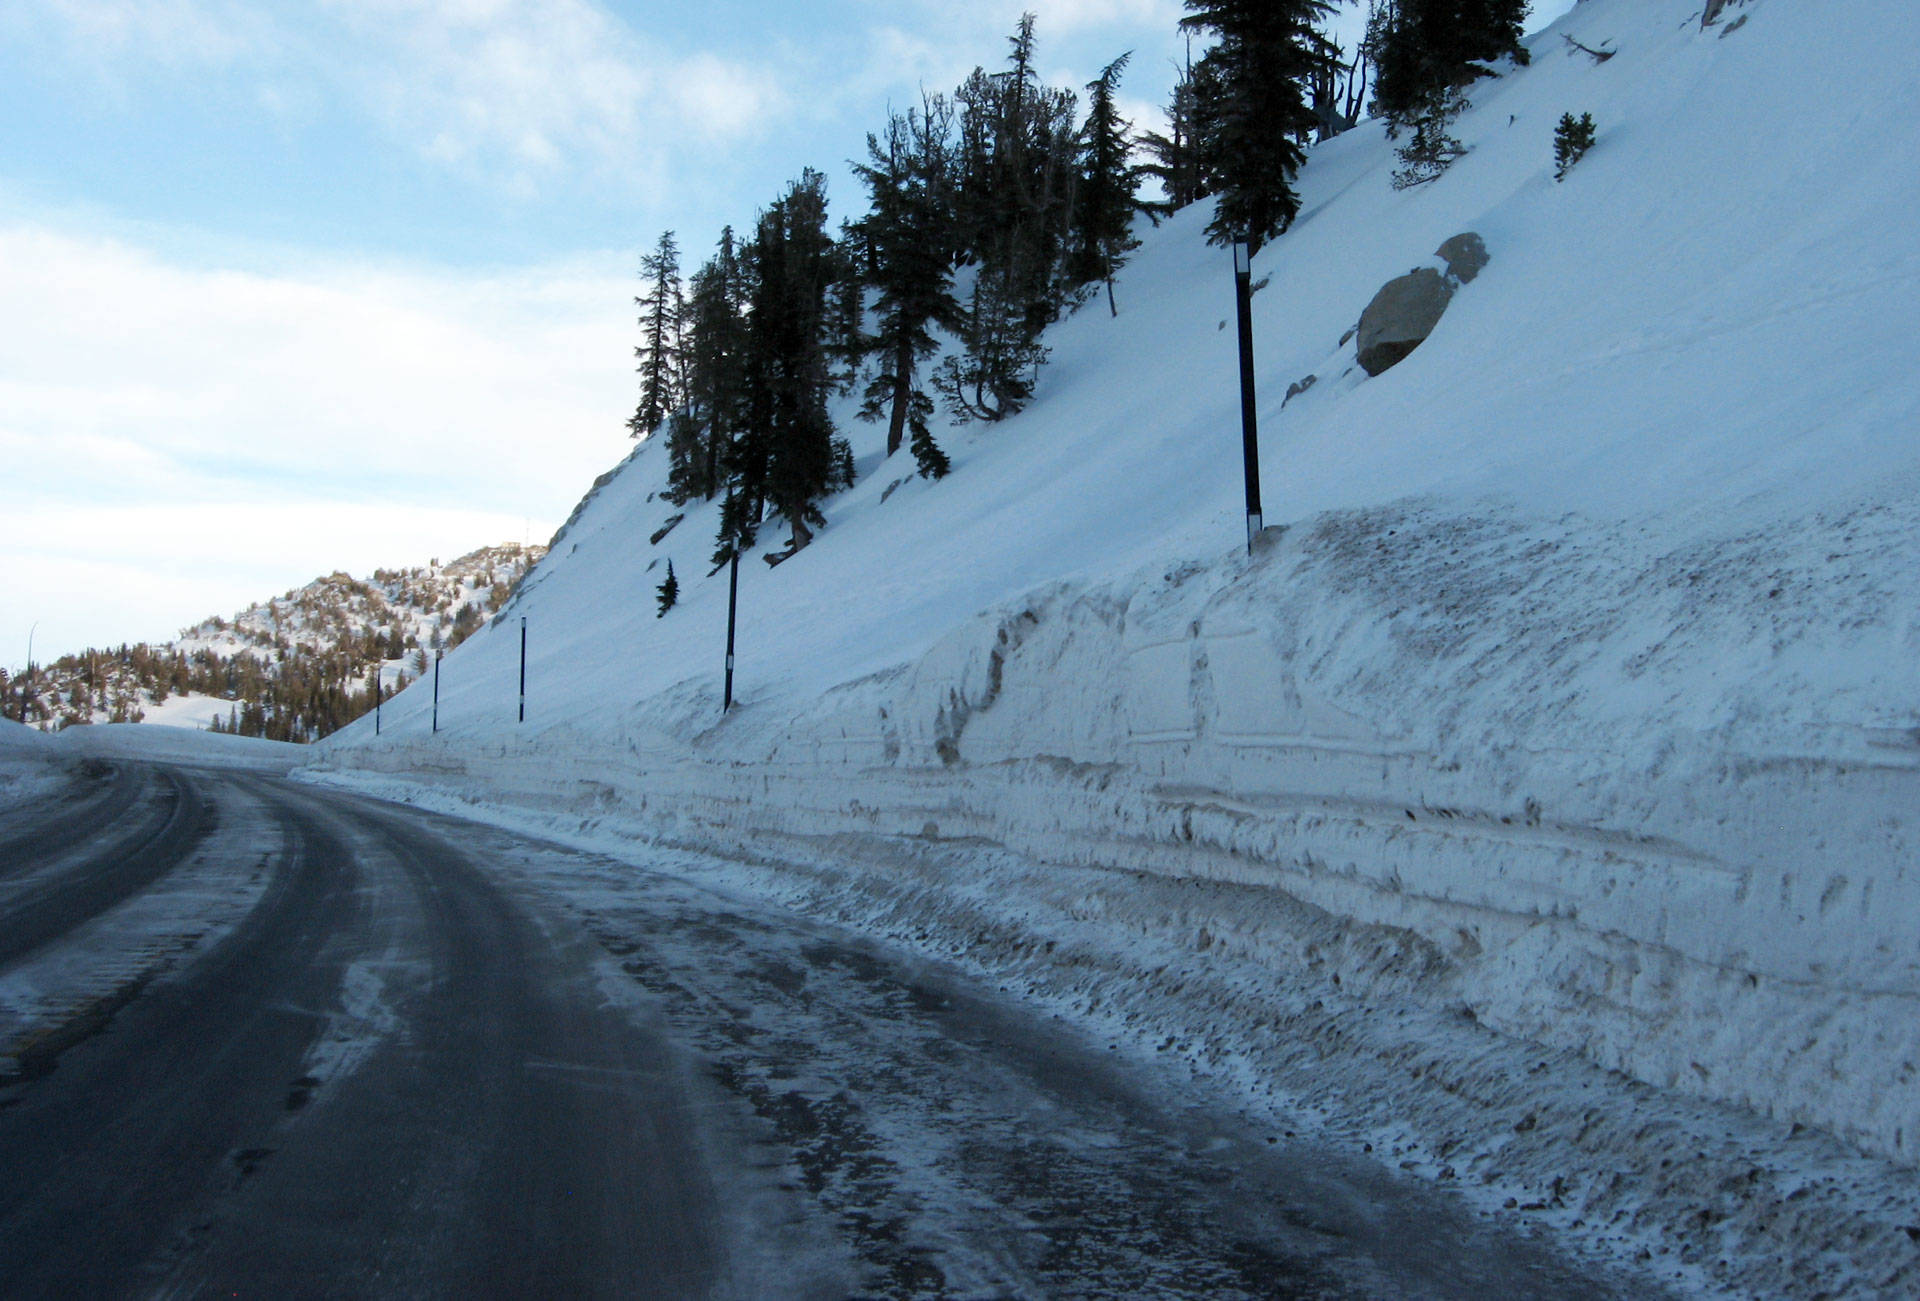 State Route 431, or the Mount Rose Highway, was closed due to an avalanche on Thursday near the Mount Rose ski resort. Wikimedia Commons